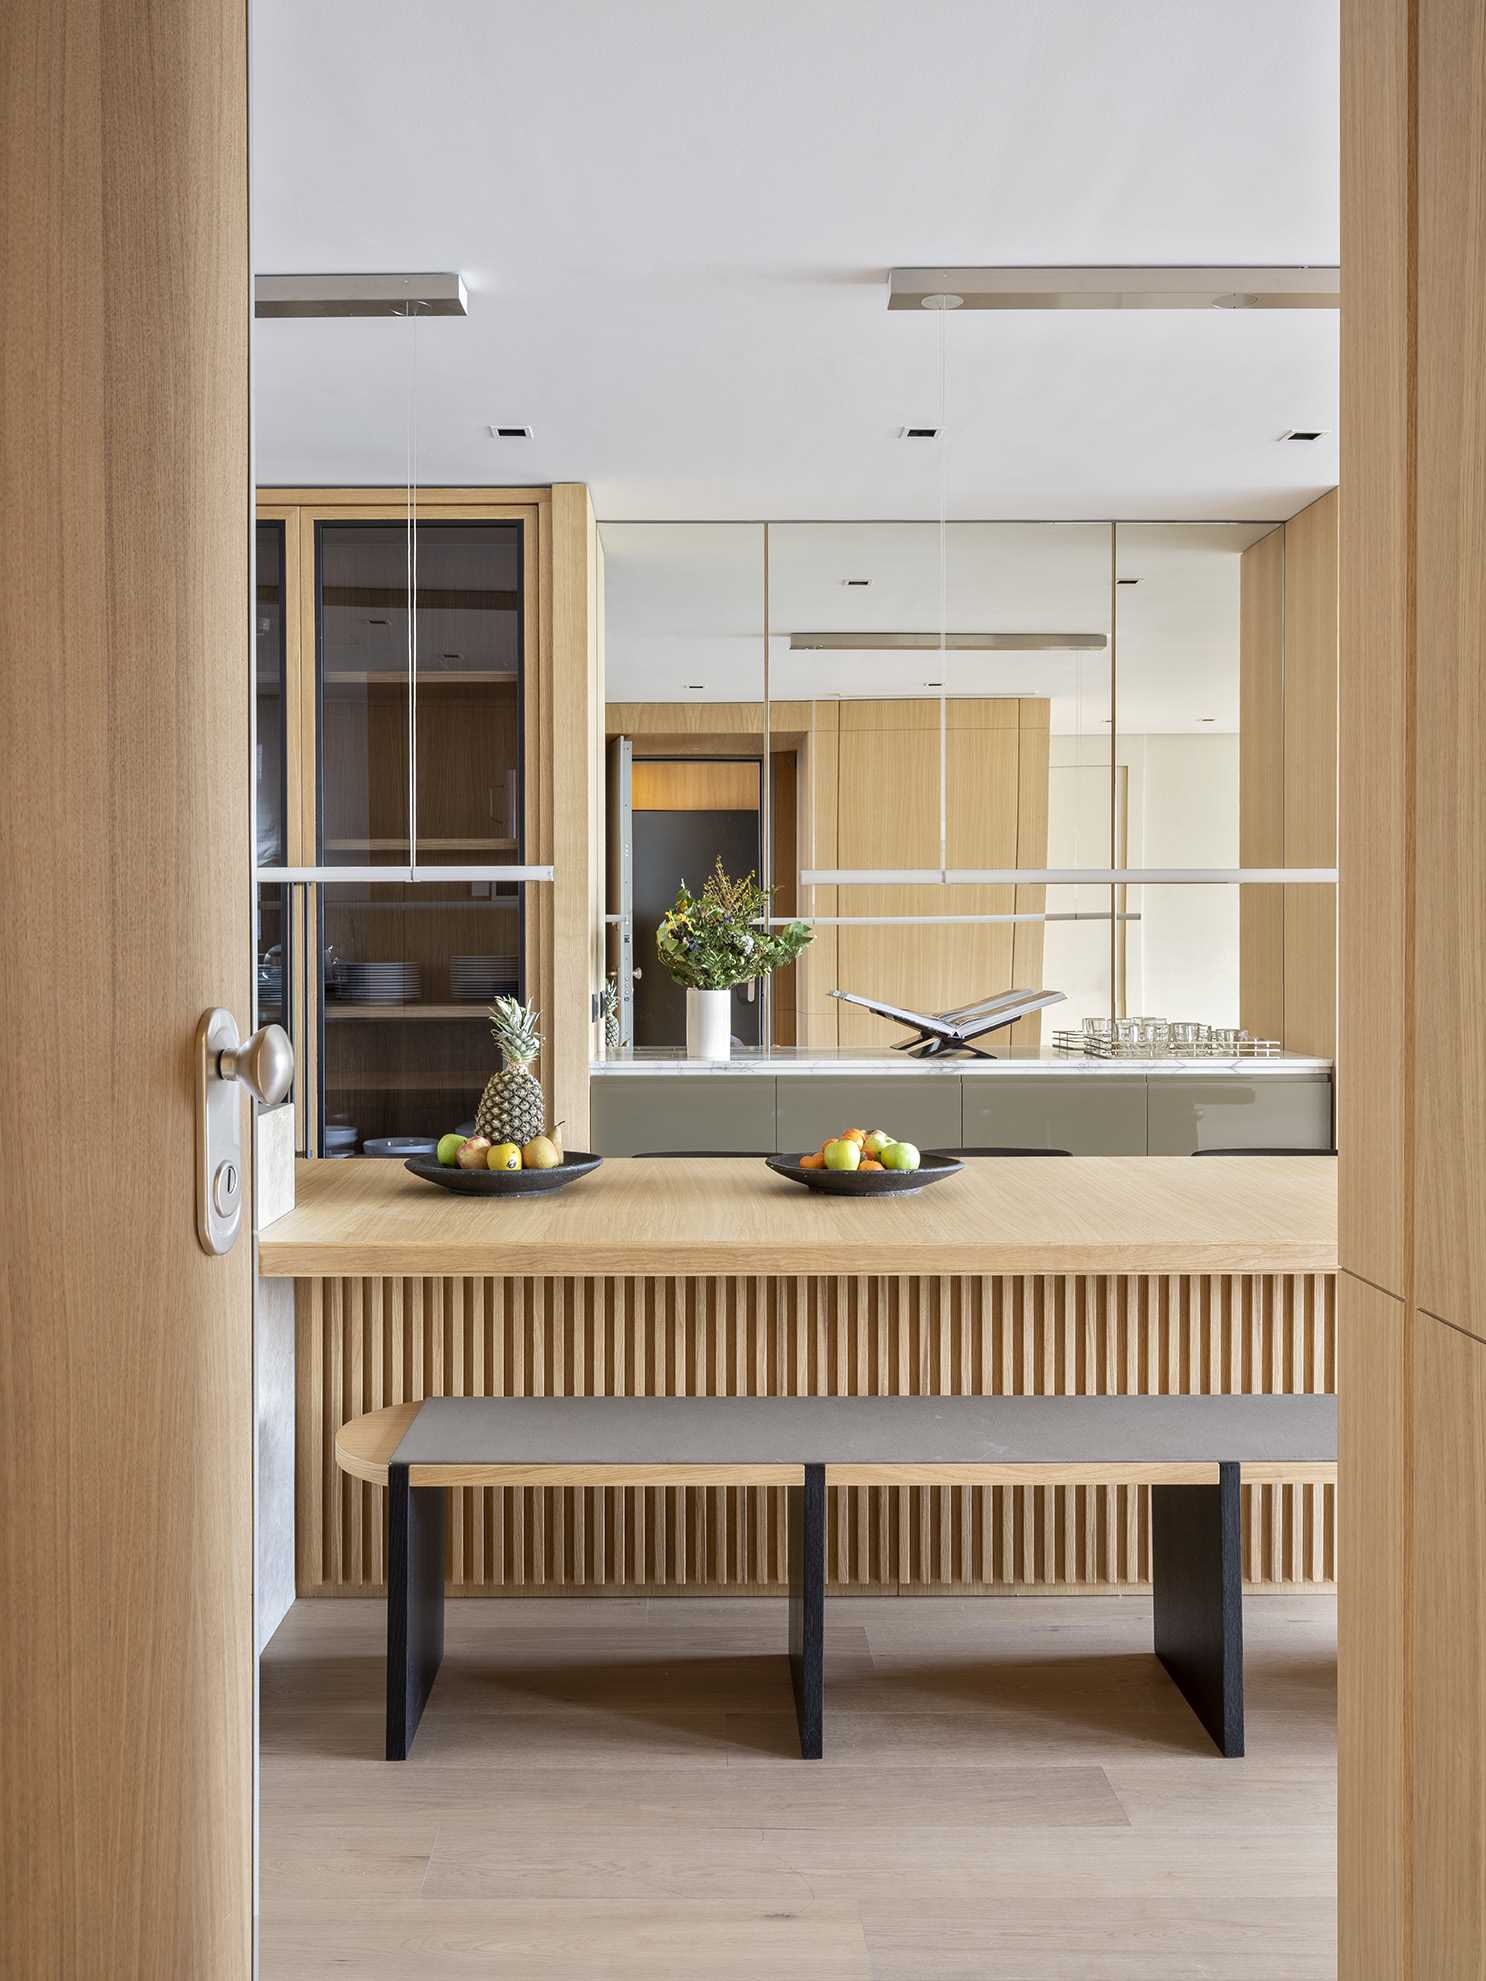 An open and ،ious kitchen layout has been designed to invite engagement, where a marble bar and a long wooden dining table play ،st. A mirrored wall has also been included in this ،e.